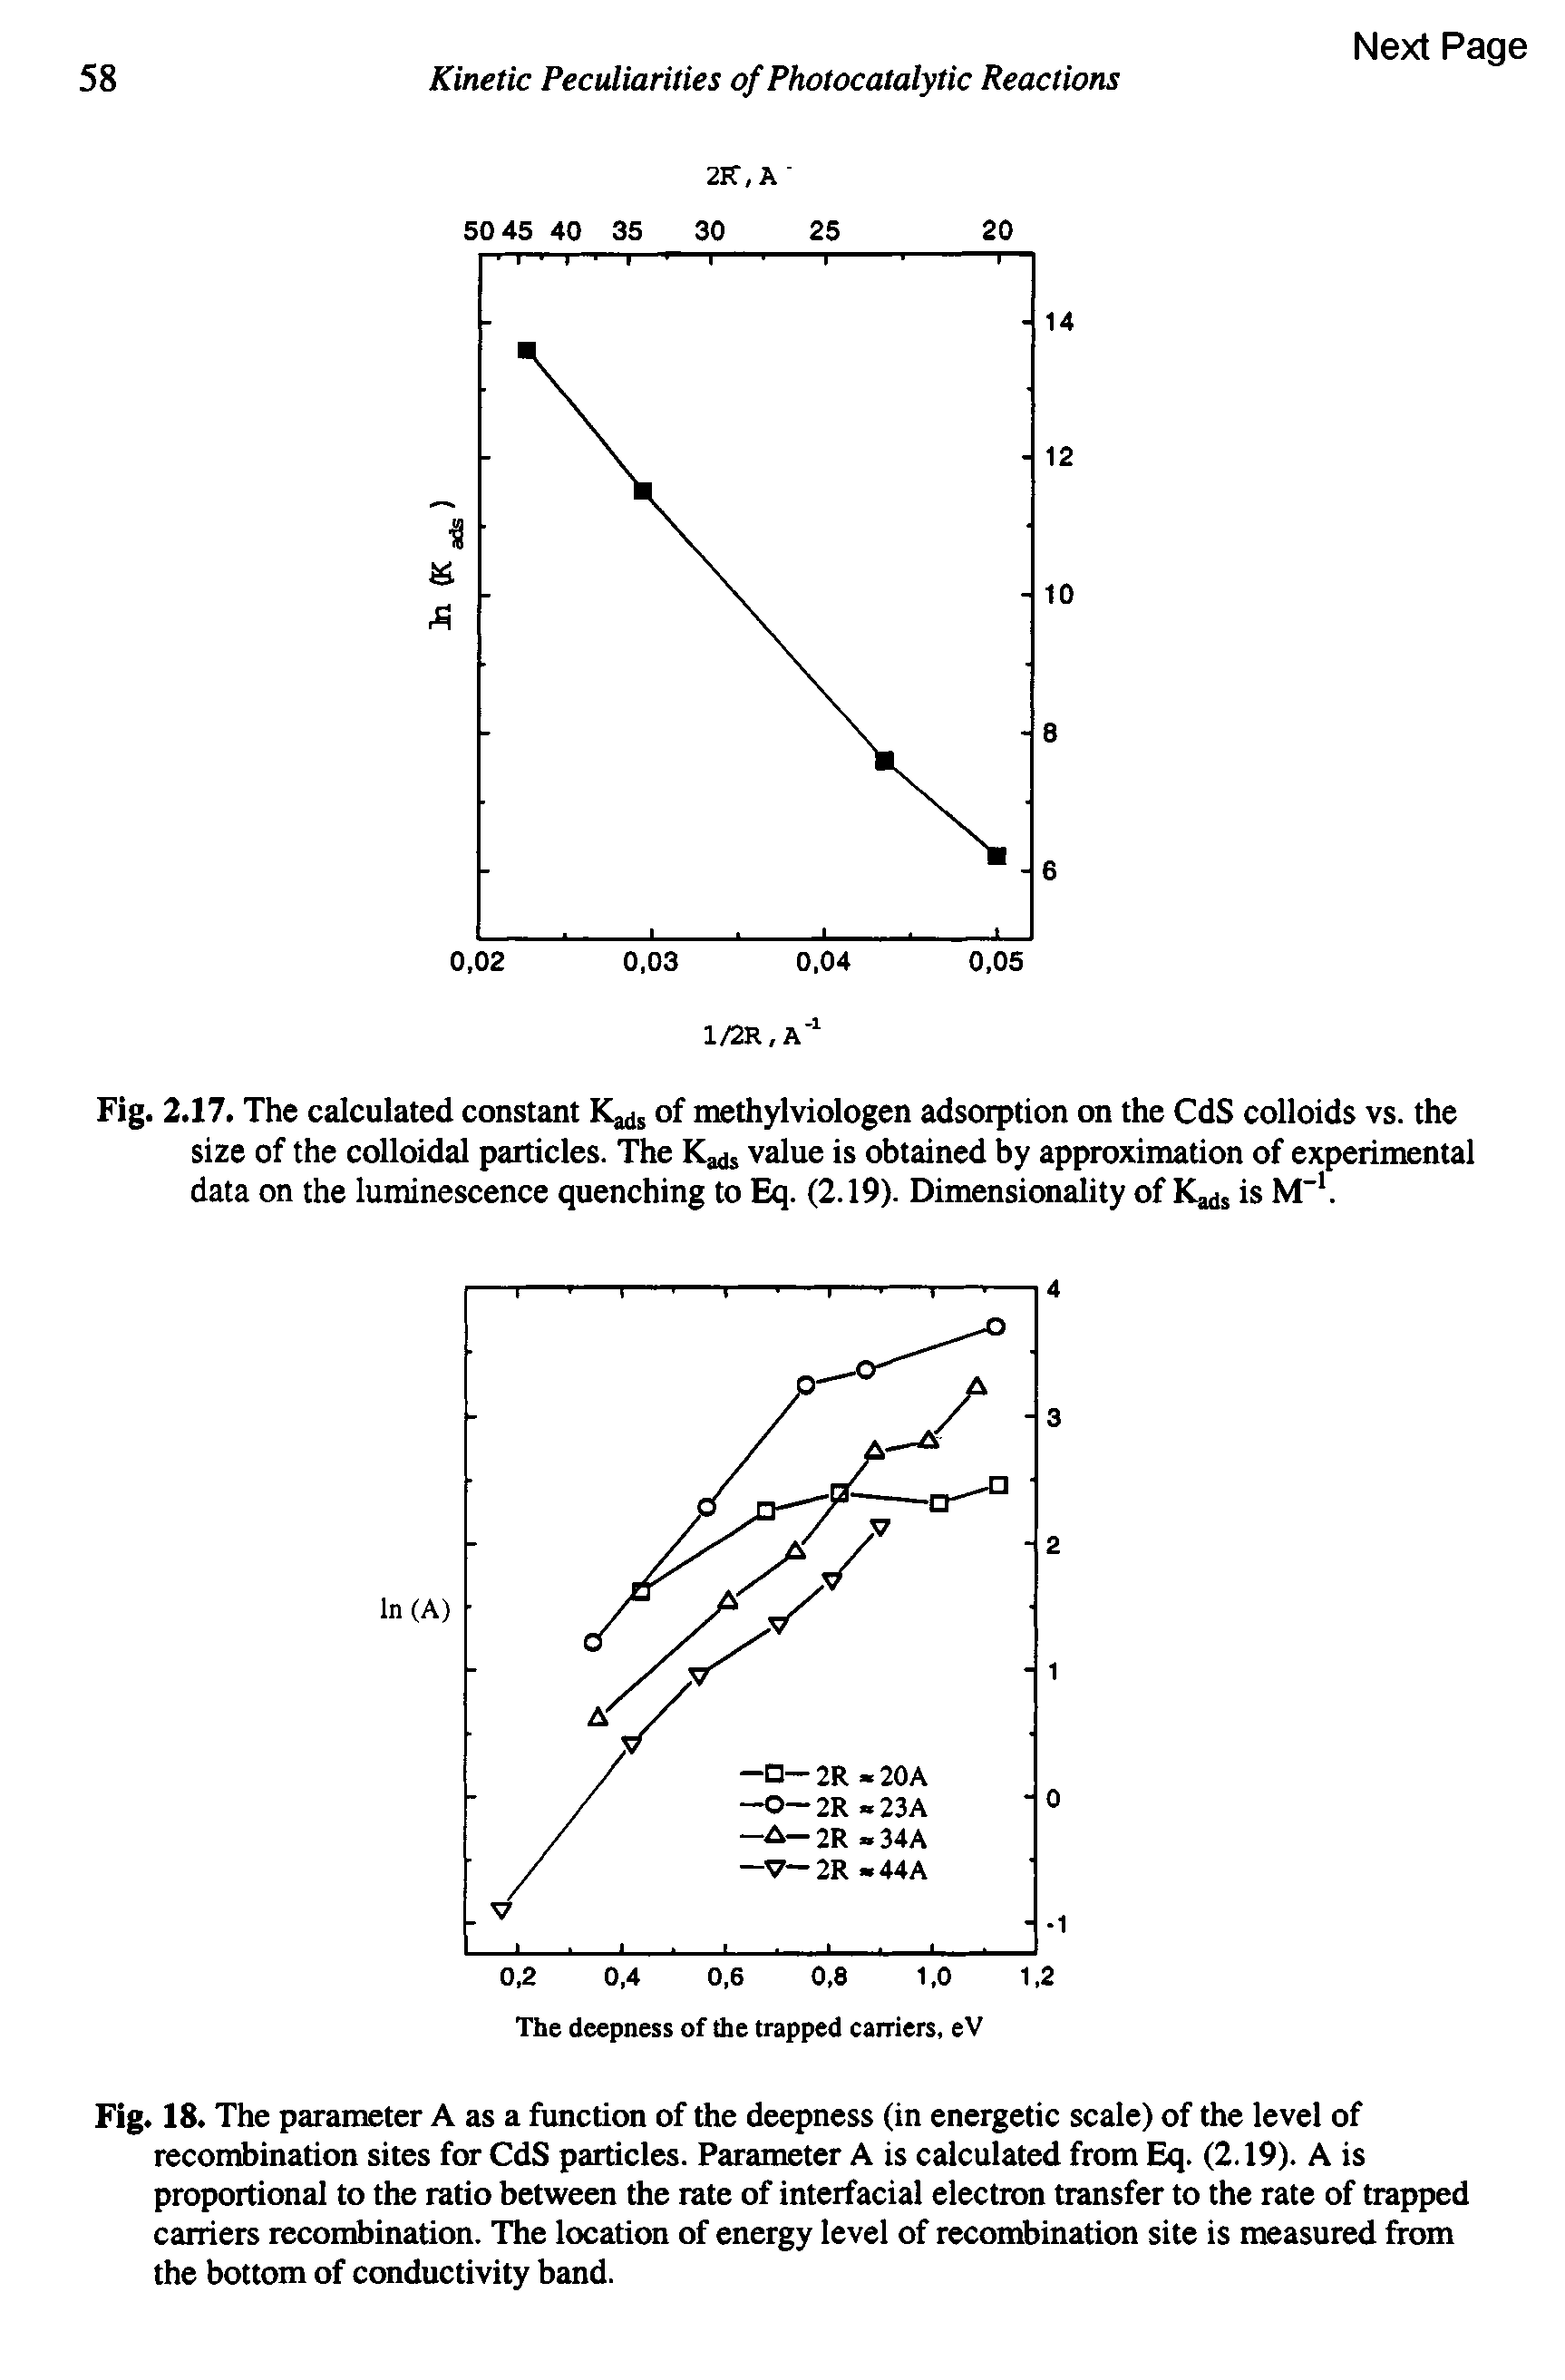 Fig. 18. The parameter A as a function of the deepness (in energetic scale) of the level of recombination sites for CdS particles. Parameter A is calculated from Eq. (2.19). A is proportional to the ratio between the rate of interfacial electron transfer to the rate of trapped carriers recombination. The location of energy level of recombination site is measured from the bottom of conductivity band.